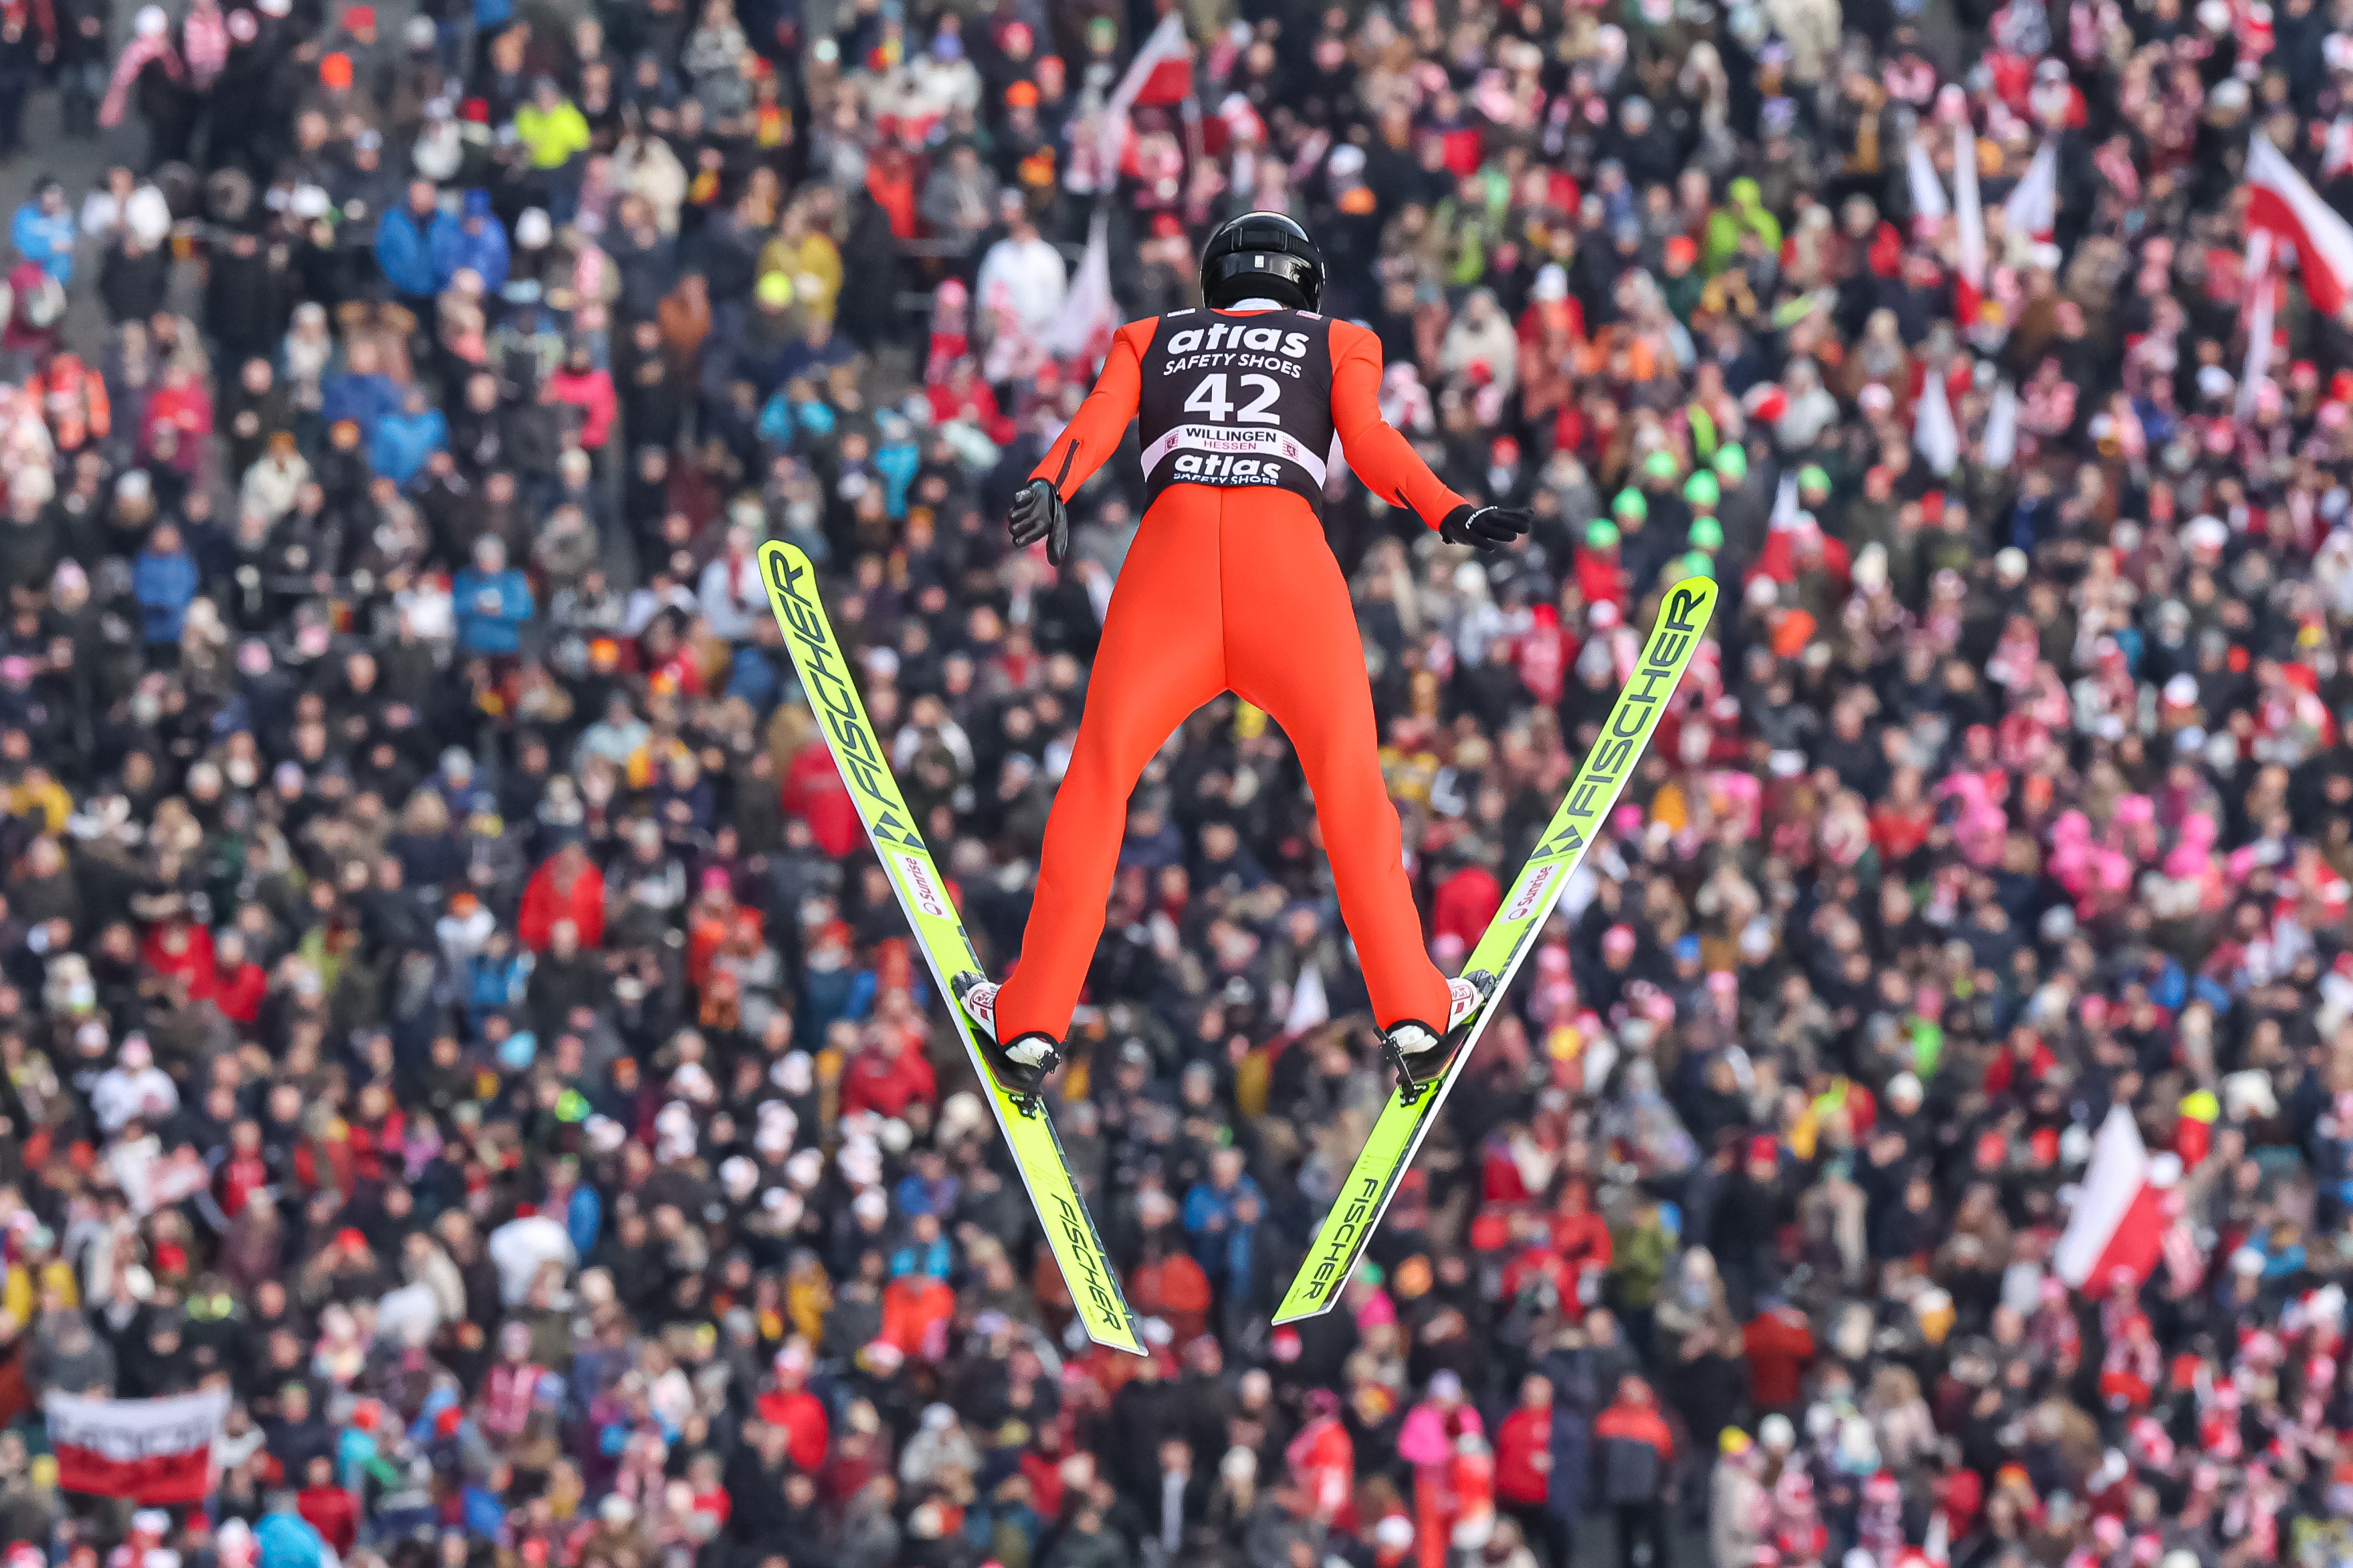 ATLAS® LIVE AT THE FIS SKI JUMPING WORLD CUP IN WILLINGEN